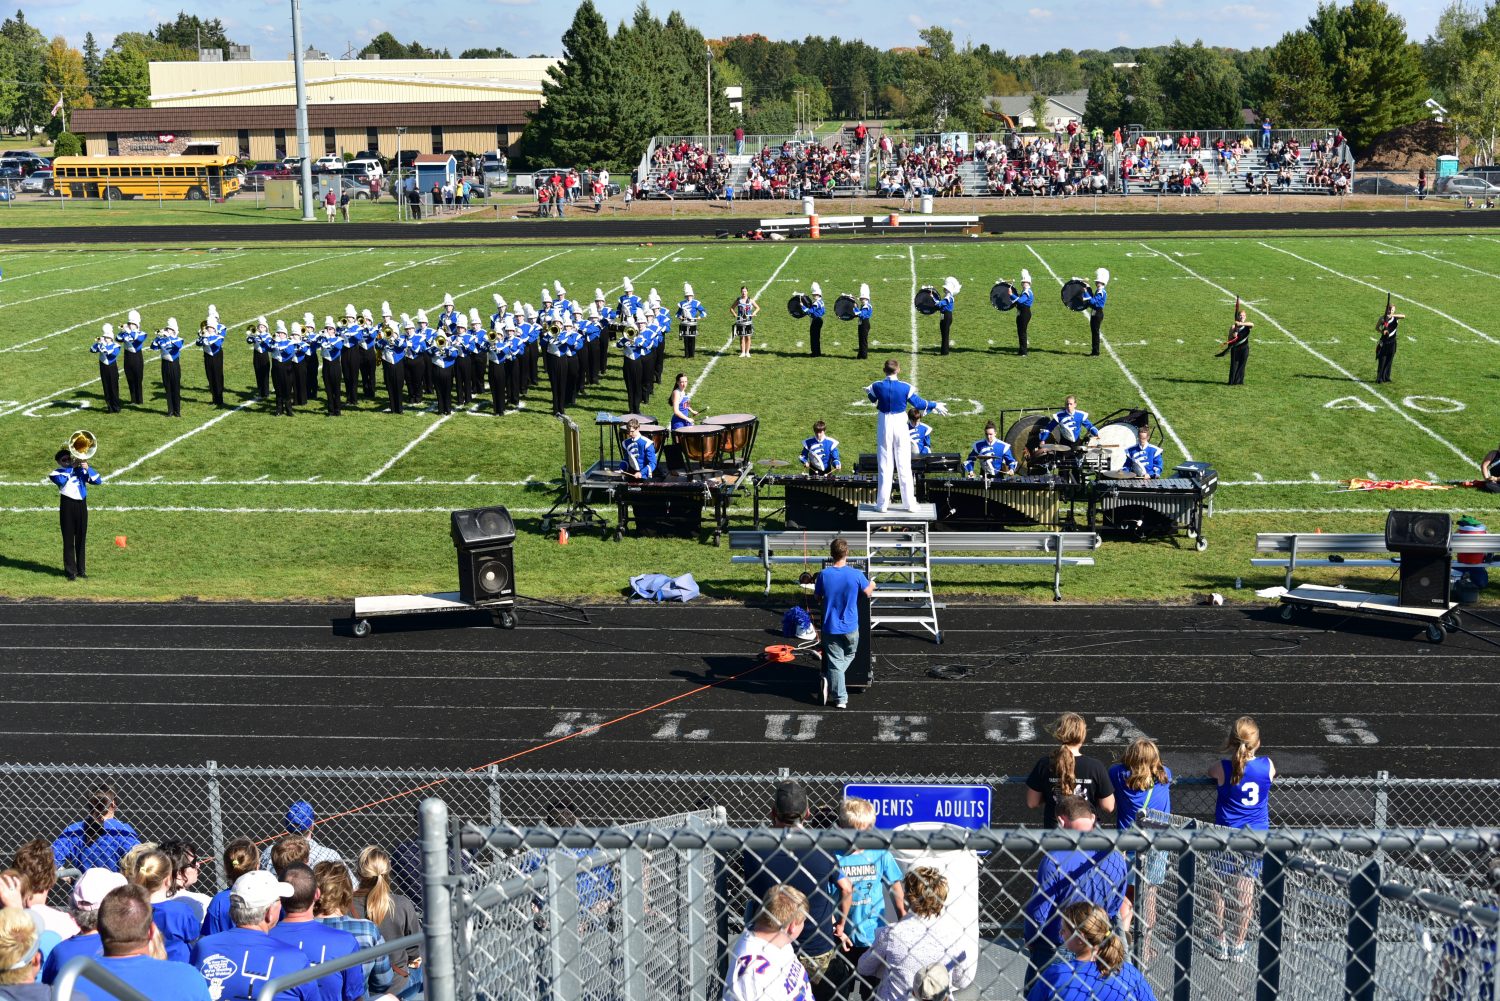 Merrill Marching Invitational to be held on Sunday